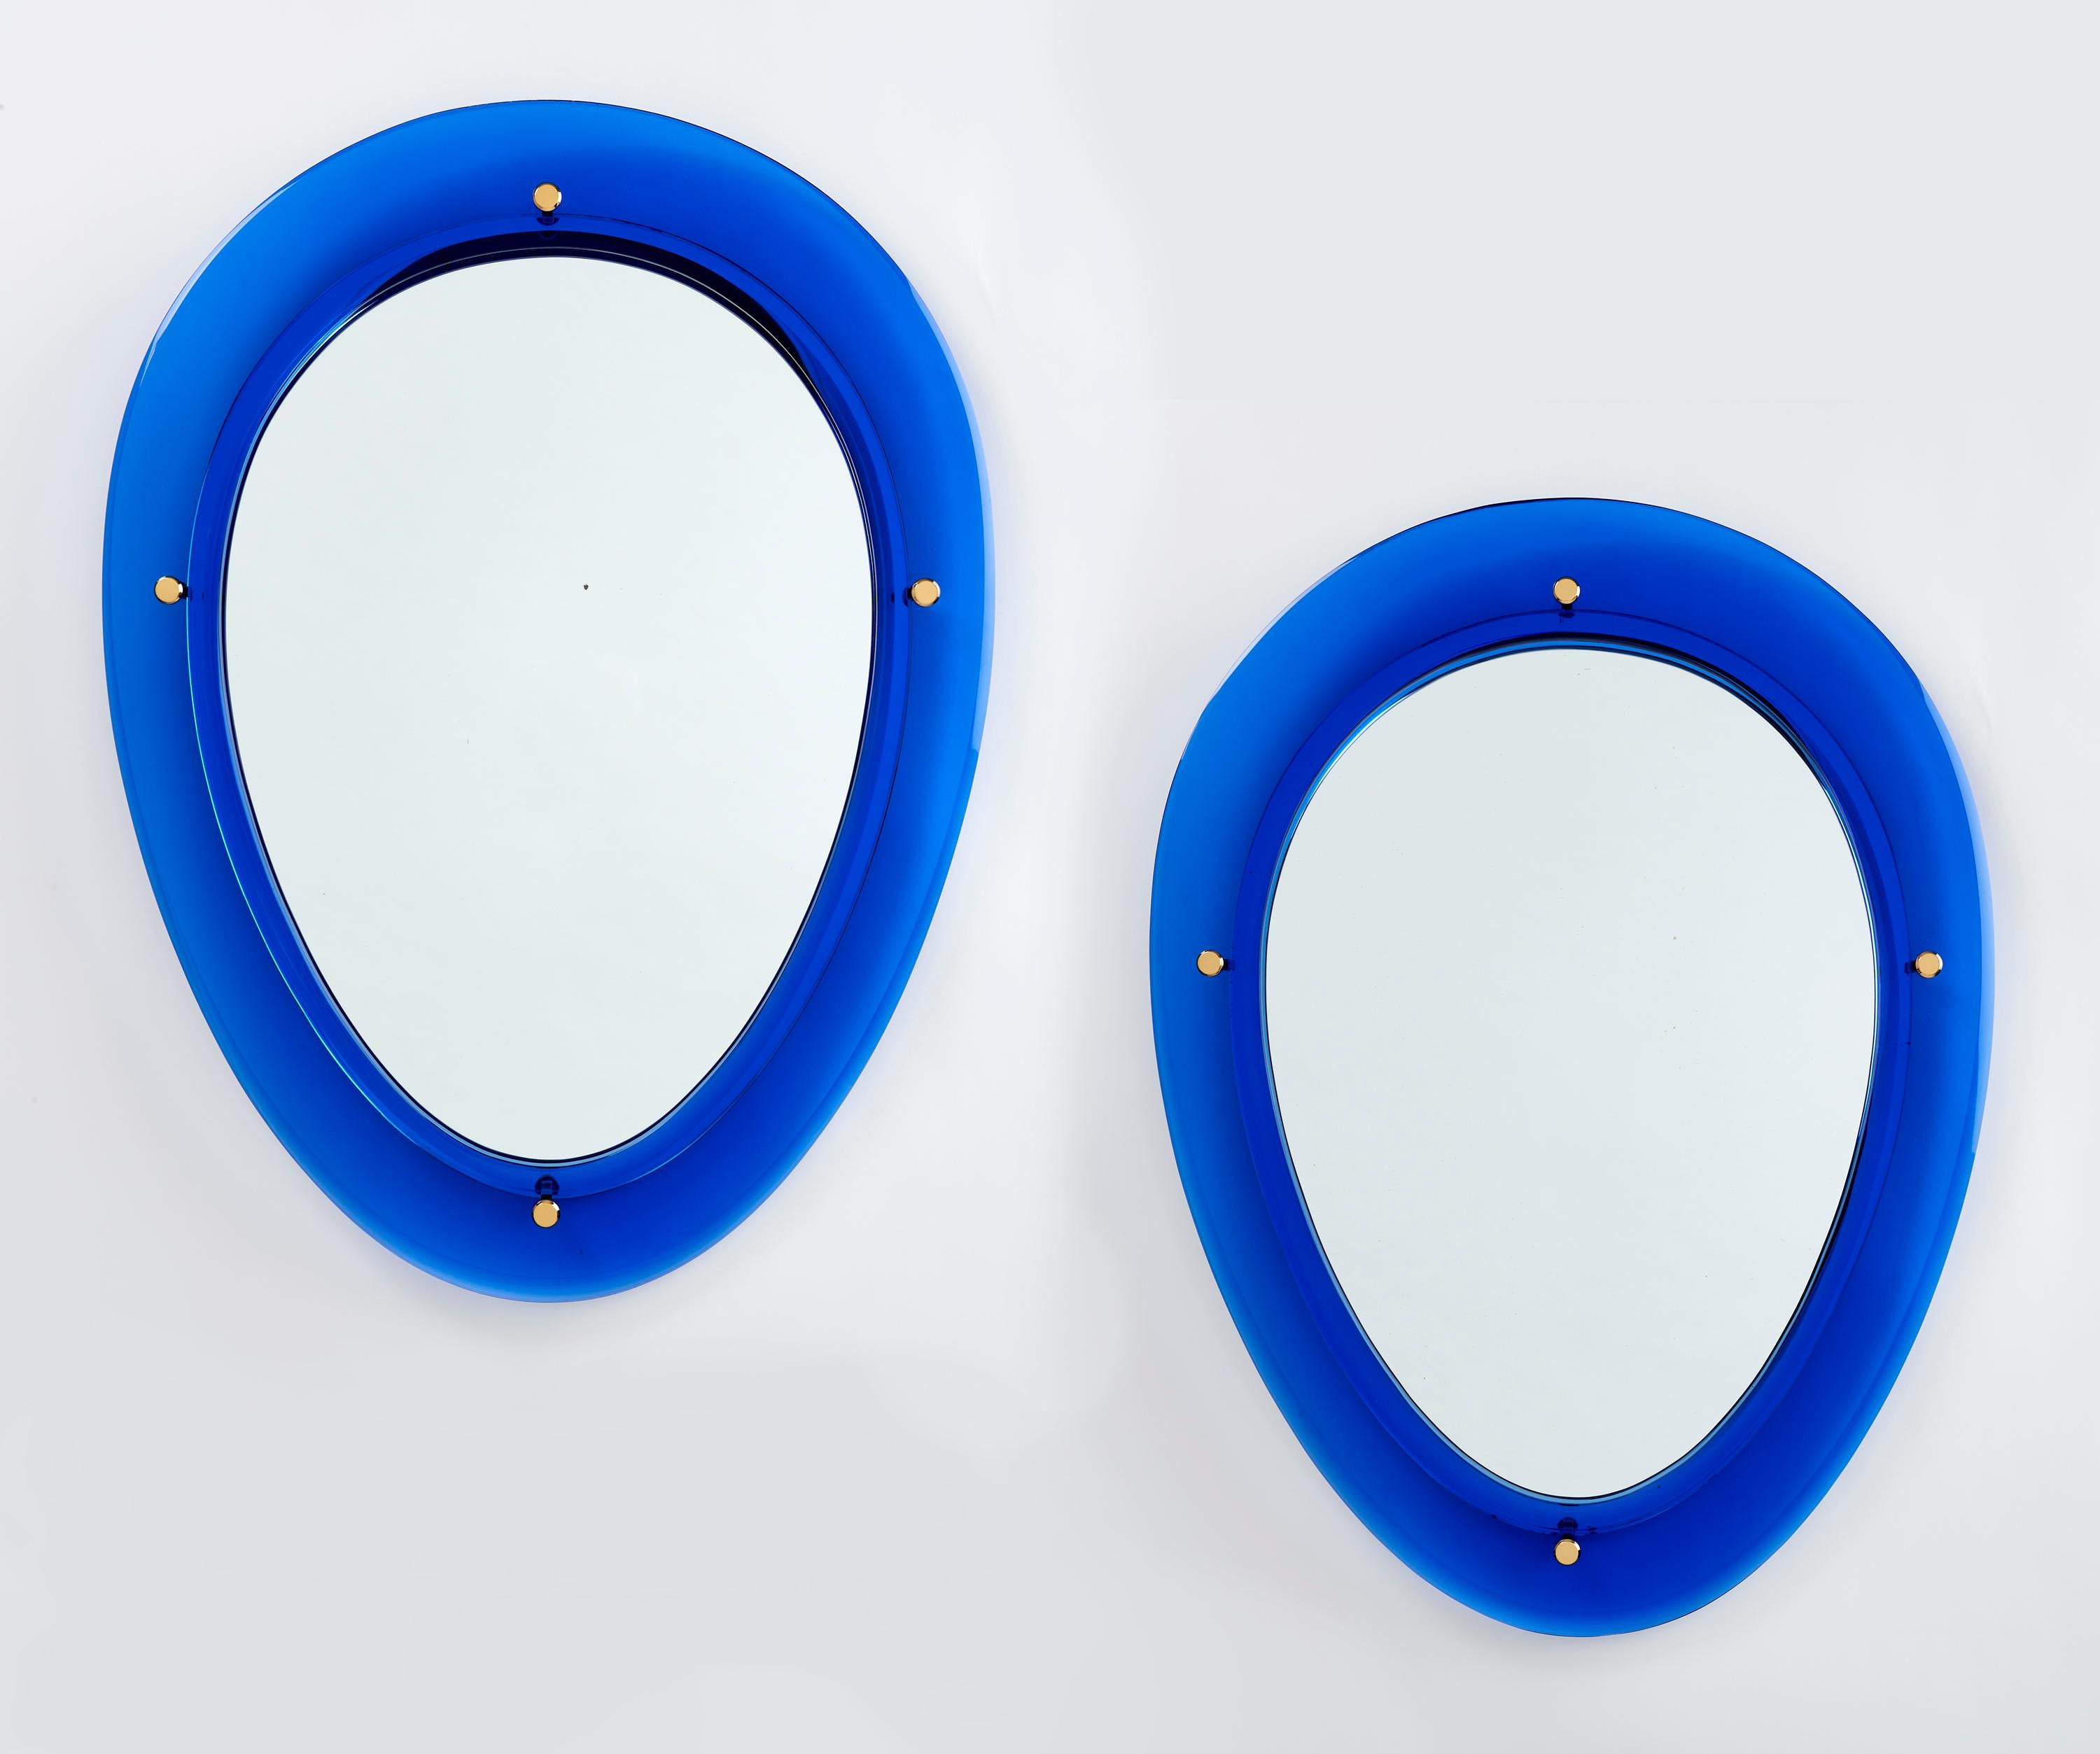 ITALY, 1960s
Pair of oval shaped blue glass mirrors, with nicely beveled glass frames and four polished brass mounts.
Sold and priced individually
Dimensions: 33 H x 25 W x 2 D.


